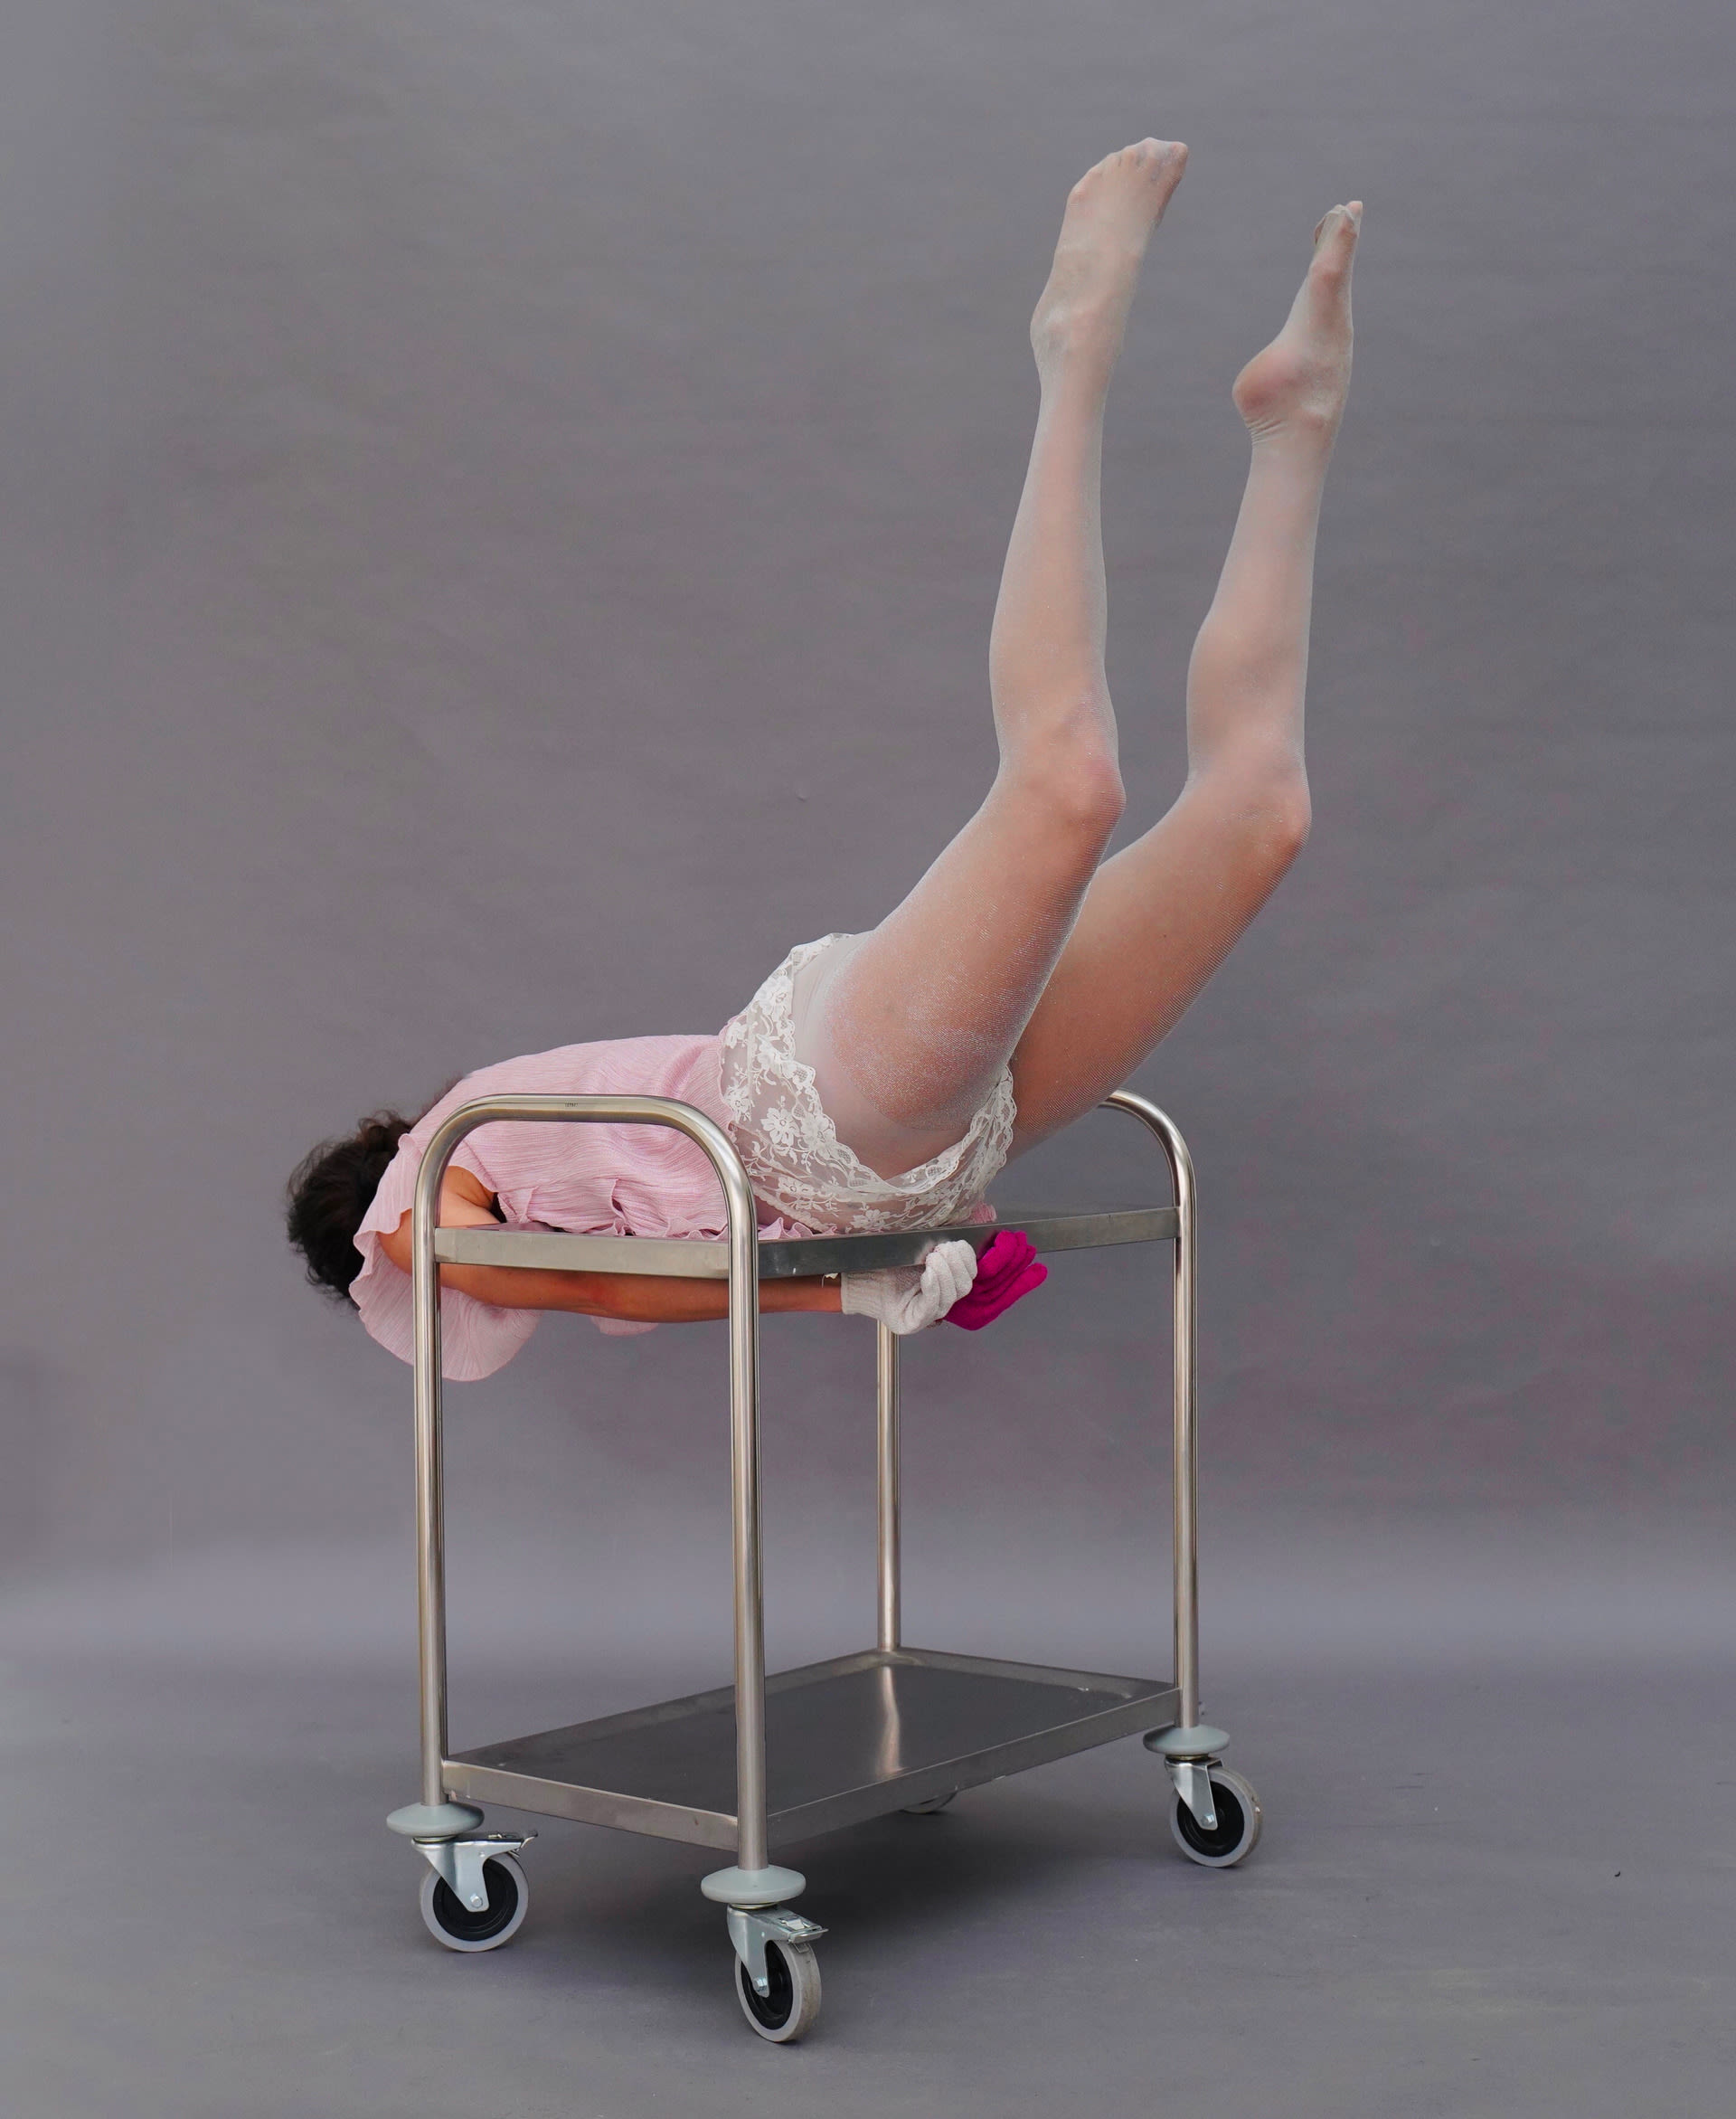 Image of a person turned to the side and away from the camera, face down on top of a silver food trolley with wheels, with their legs lifted up into the air, on a grey background.